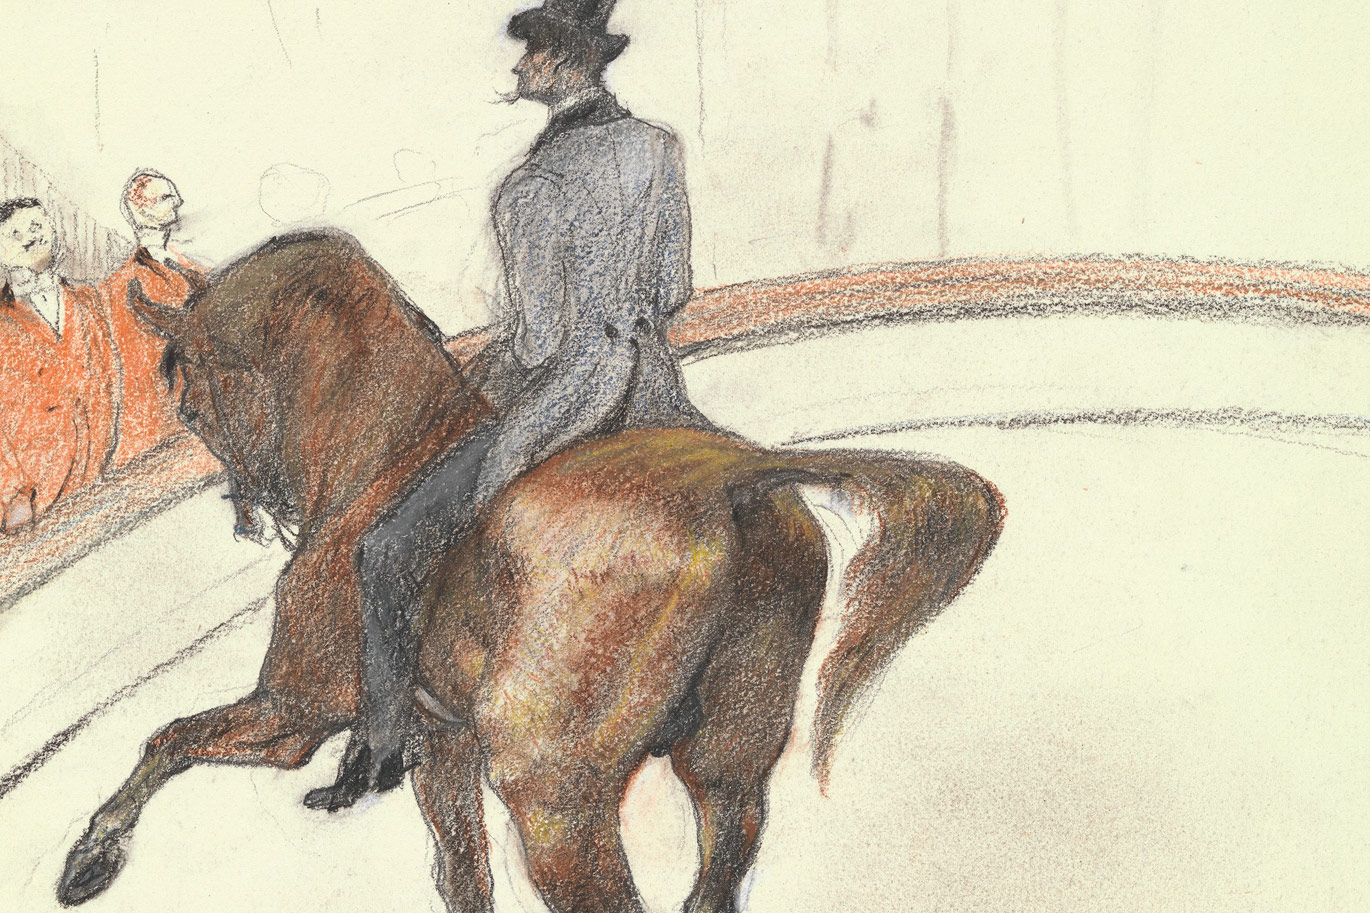 At the Circus: The Spanish Walk by Henri de Toulouse-Lautrec